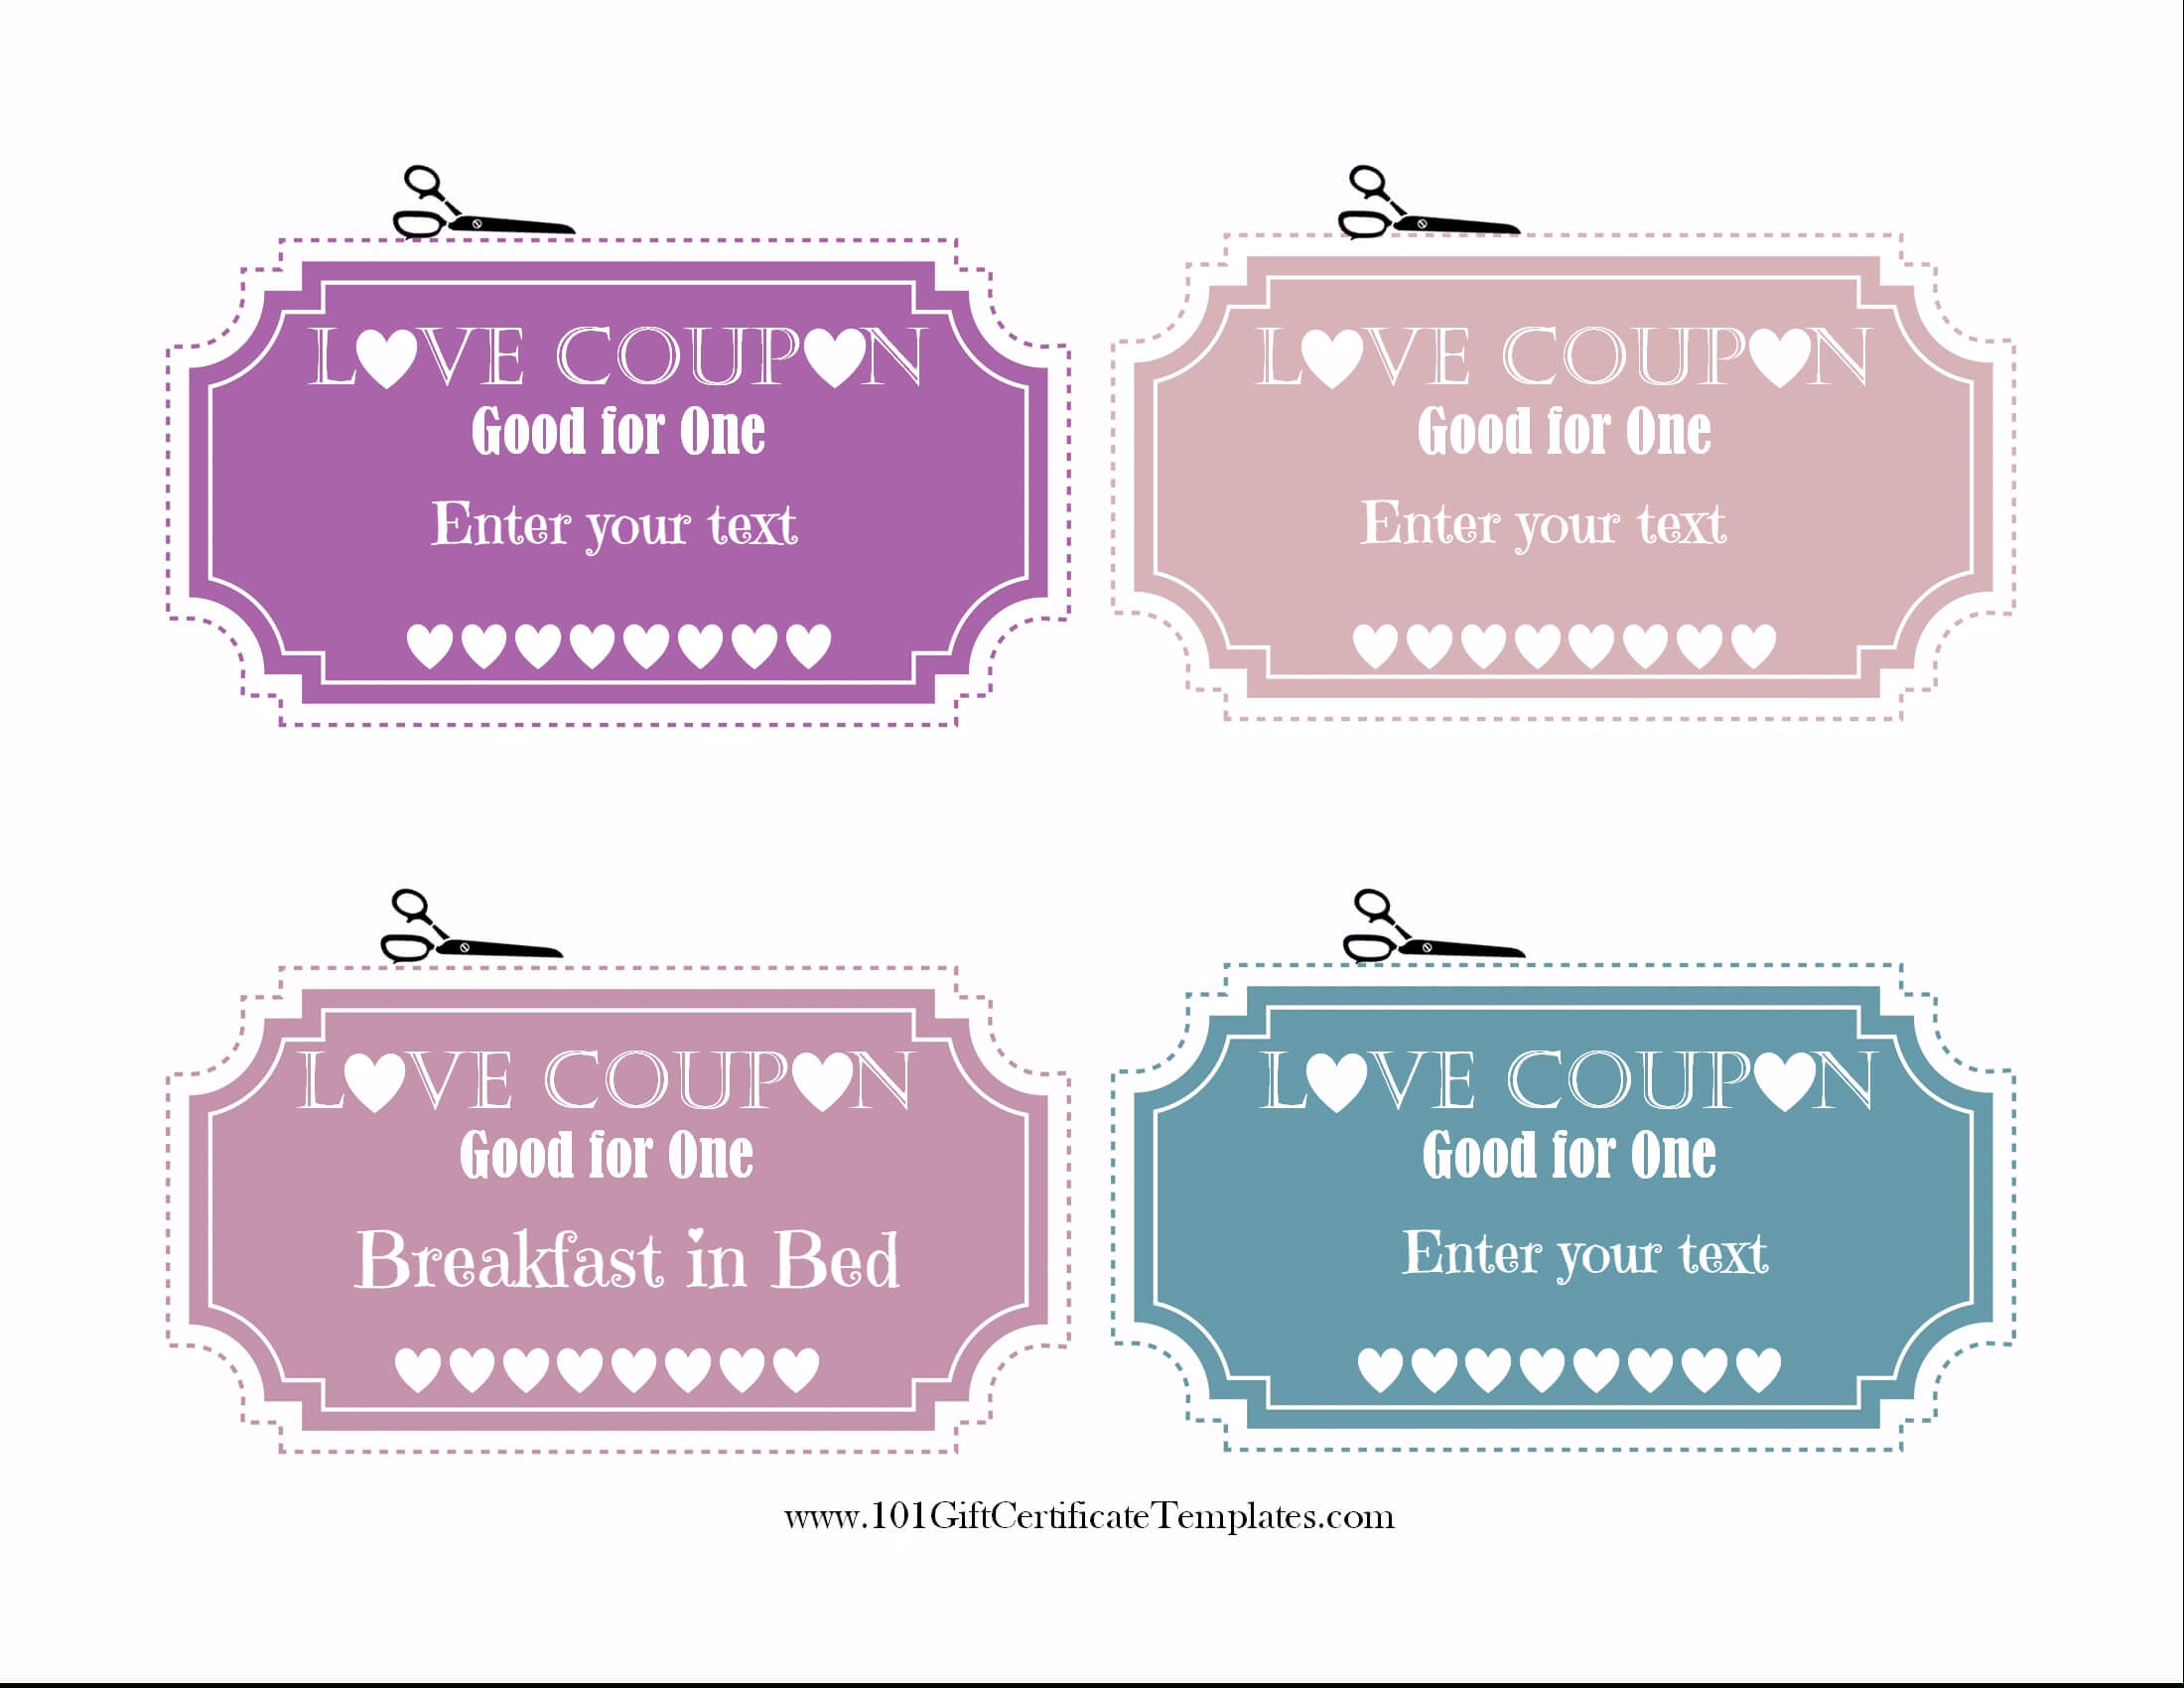 Love Coupon Examples